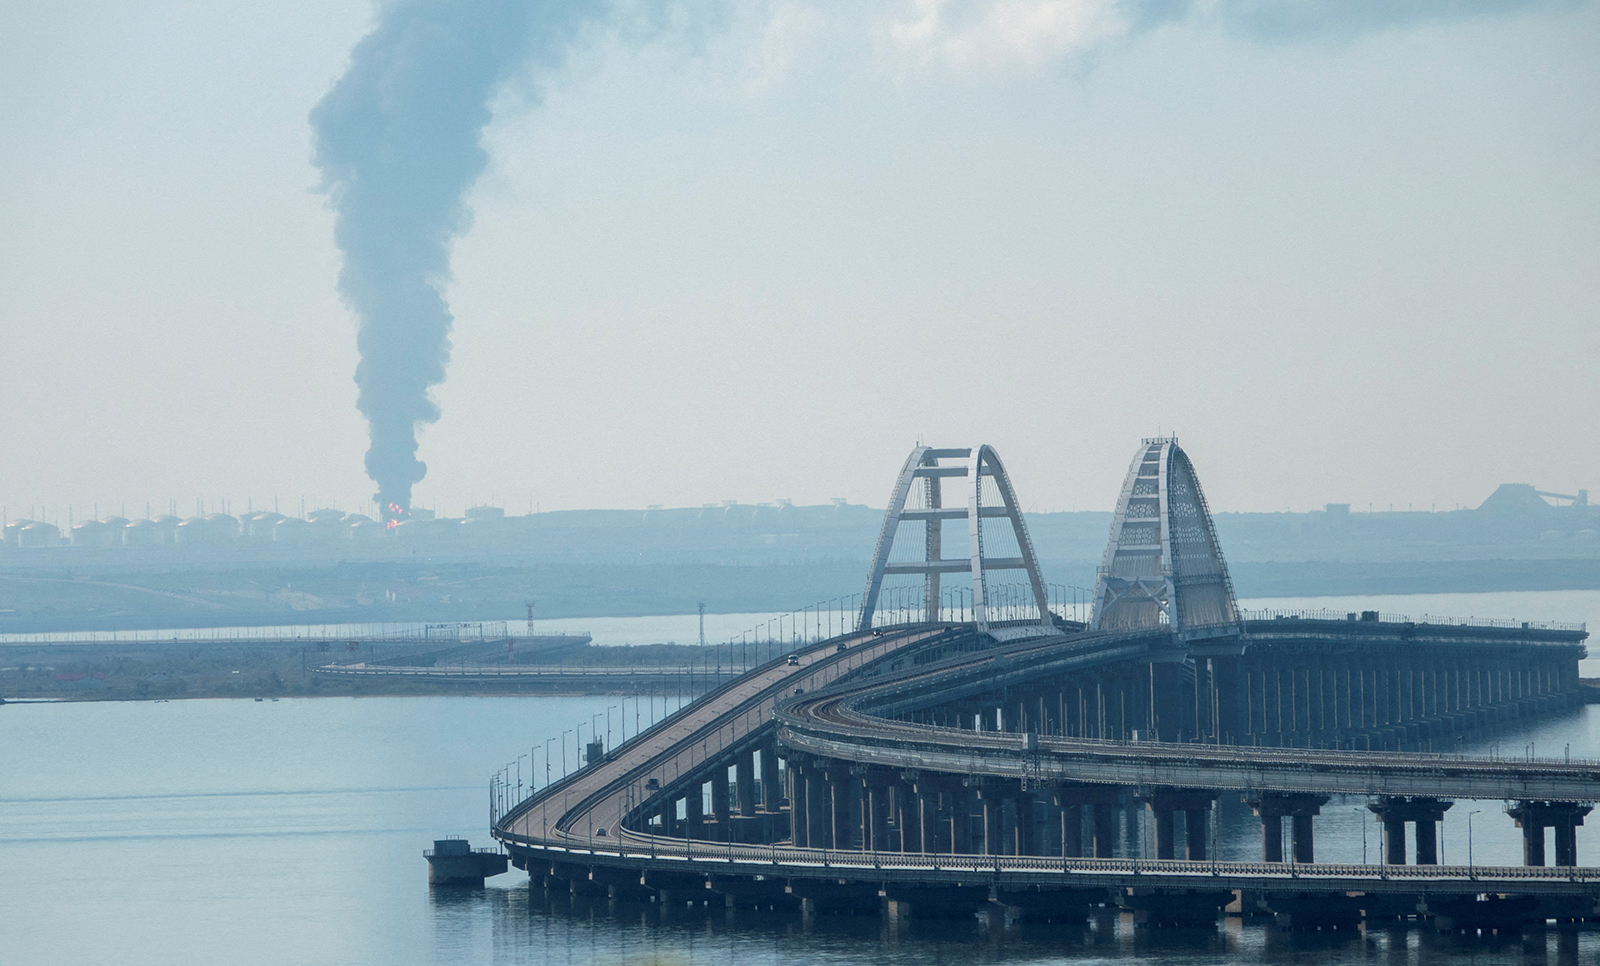 A view across the Kerch Strait shows smoke rising above a fuel depot near the Crimean bridge in the village of Volna in Russia's Krasnodar region as seen from a coastline in Crimea, on May 3.